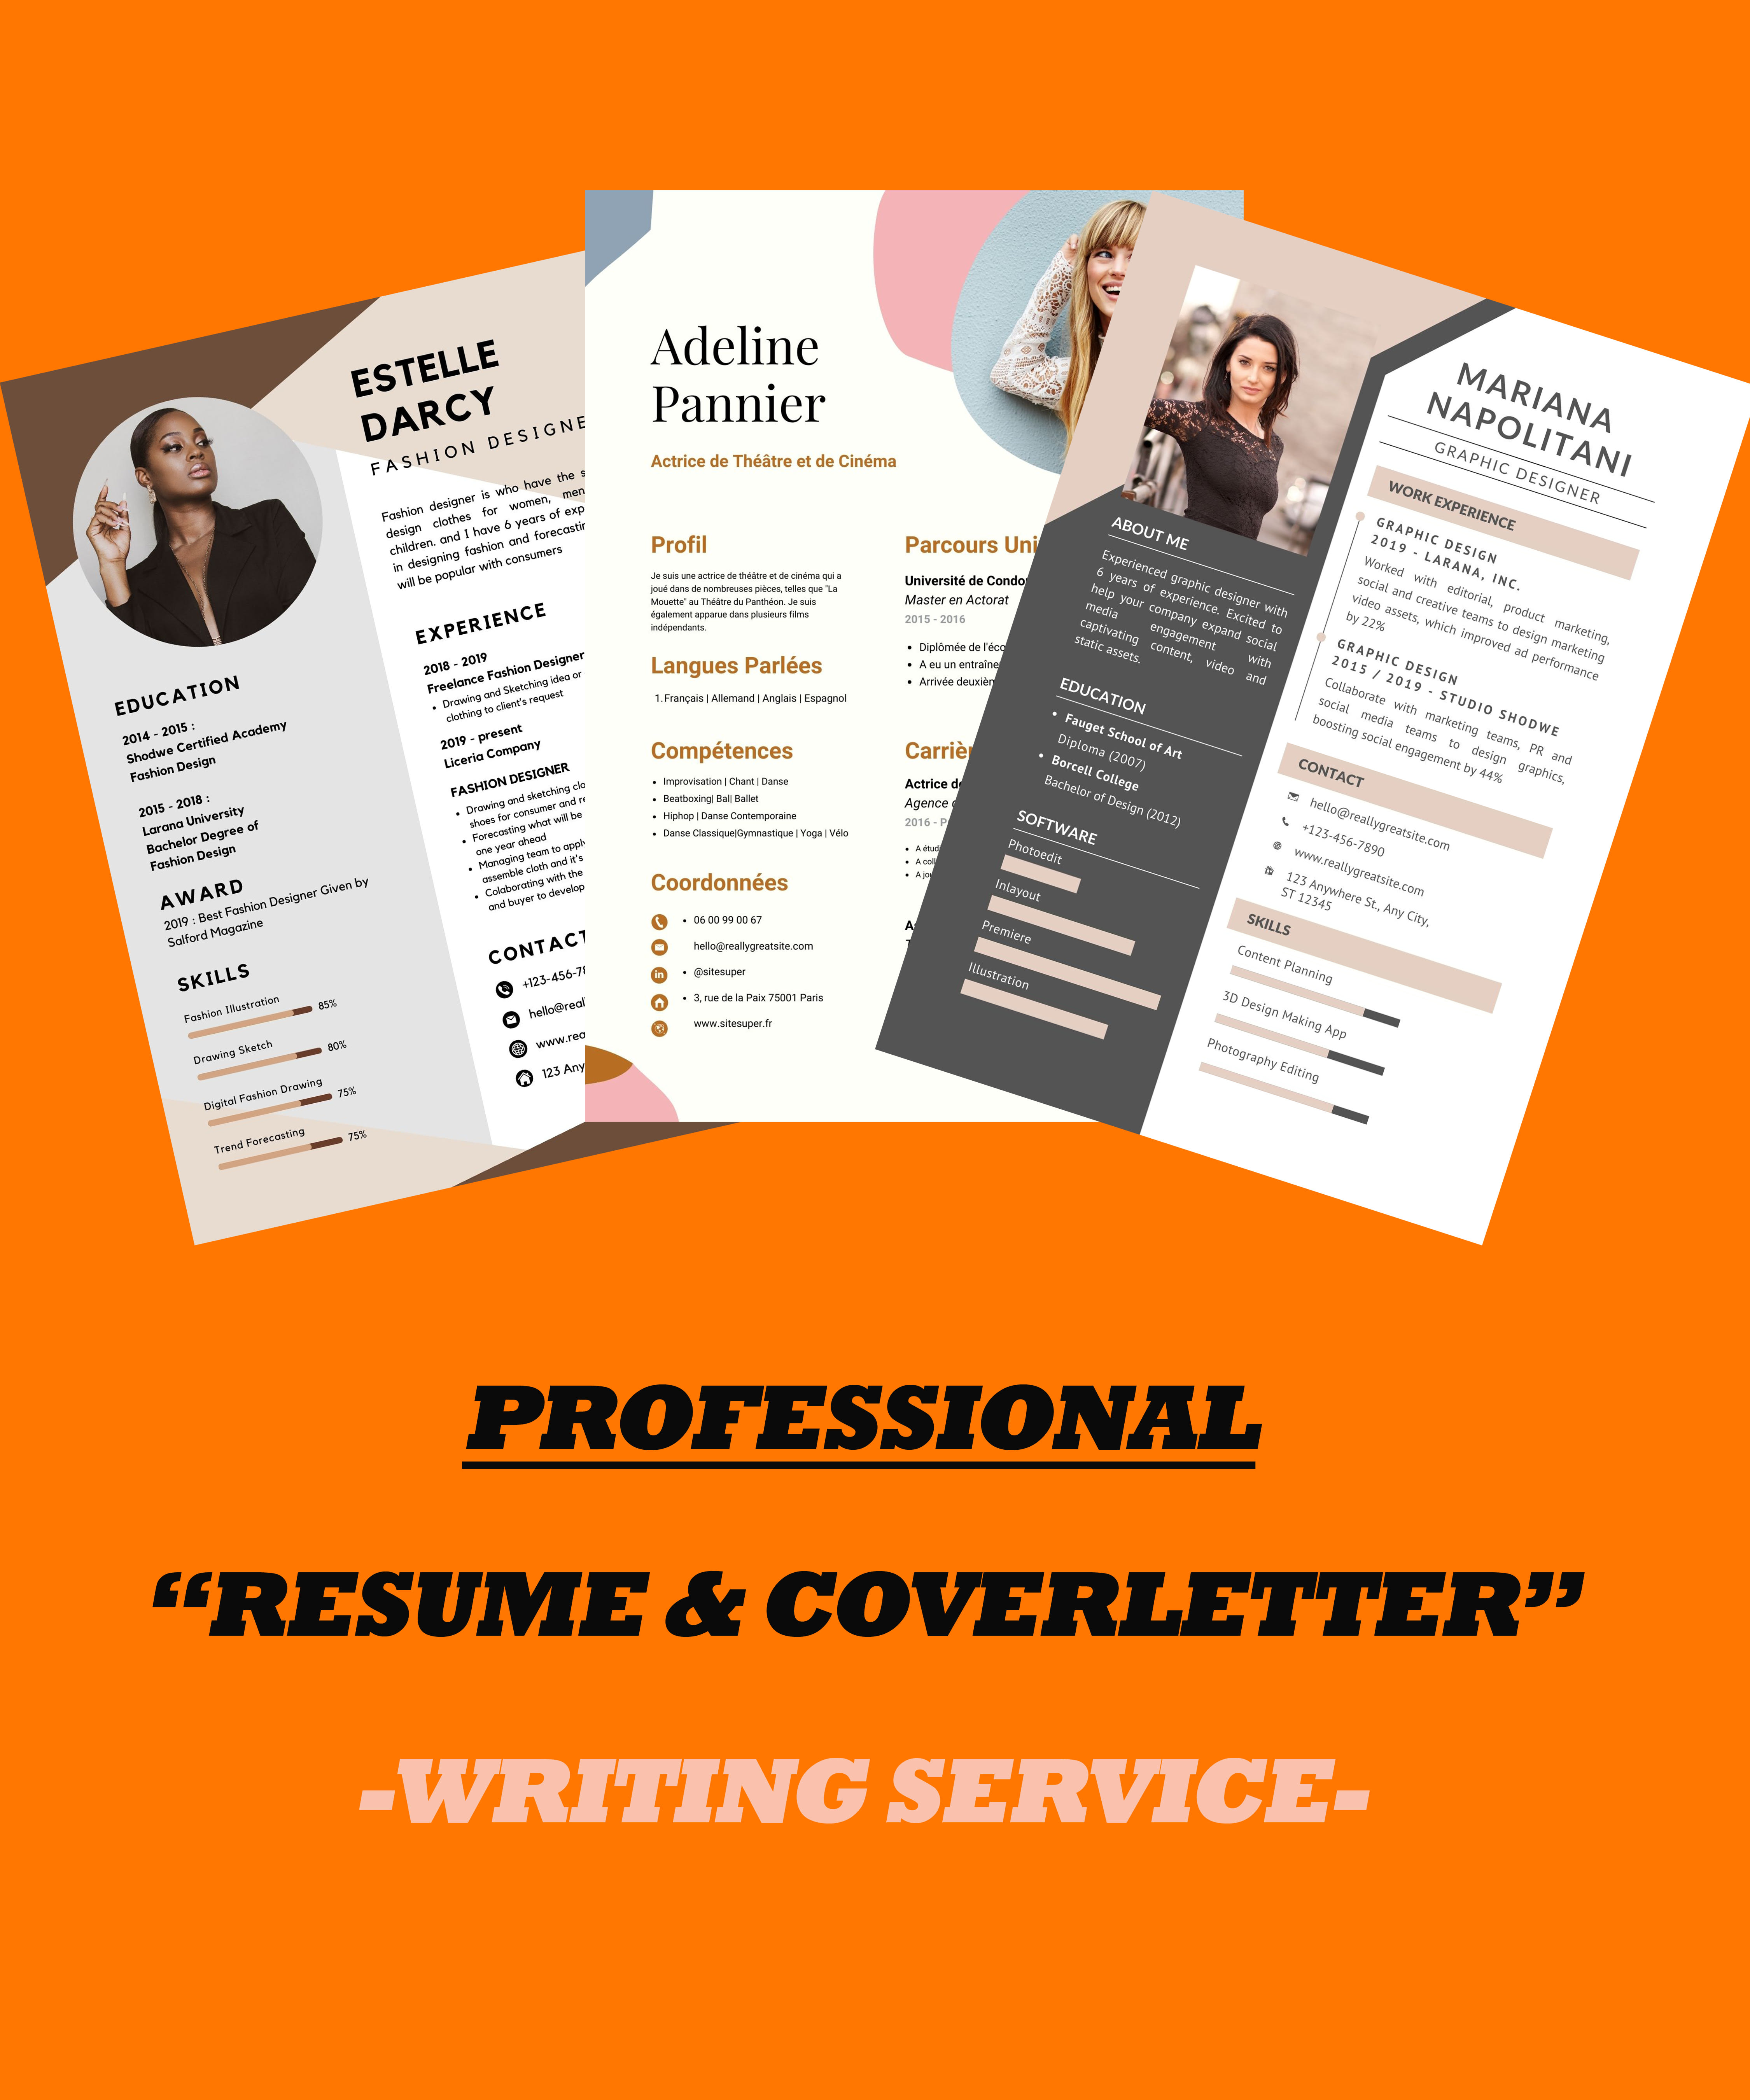 Make You A Professional Resume, Cv, And Cover Letter By Zaynabsaghe | Fiverr